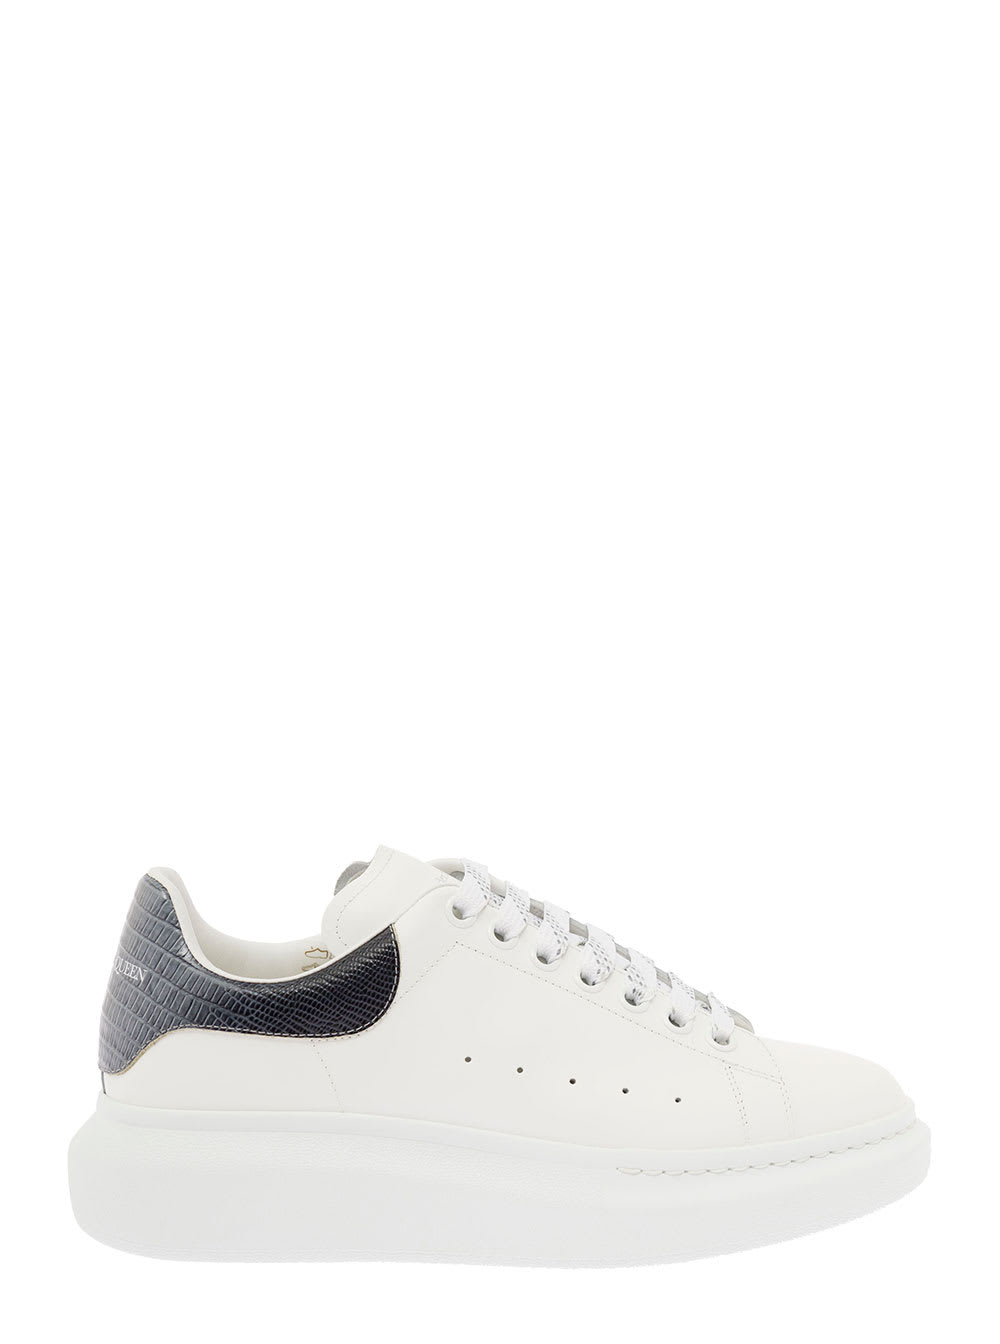 Alexander McQueen Oversize White Leather Sneakers With Crocodile Printed Heel Tab Man